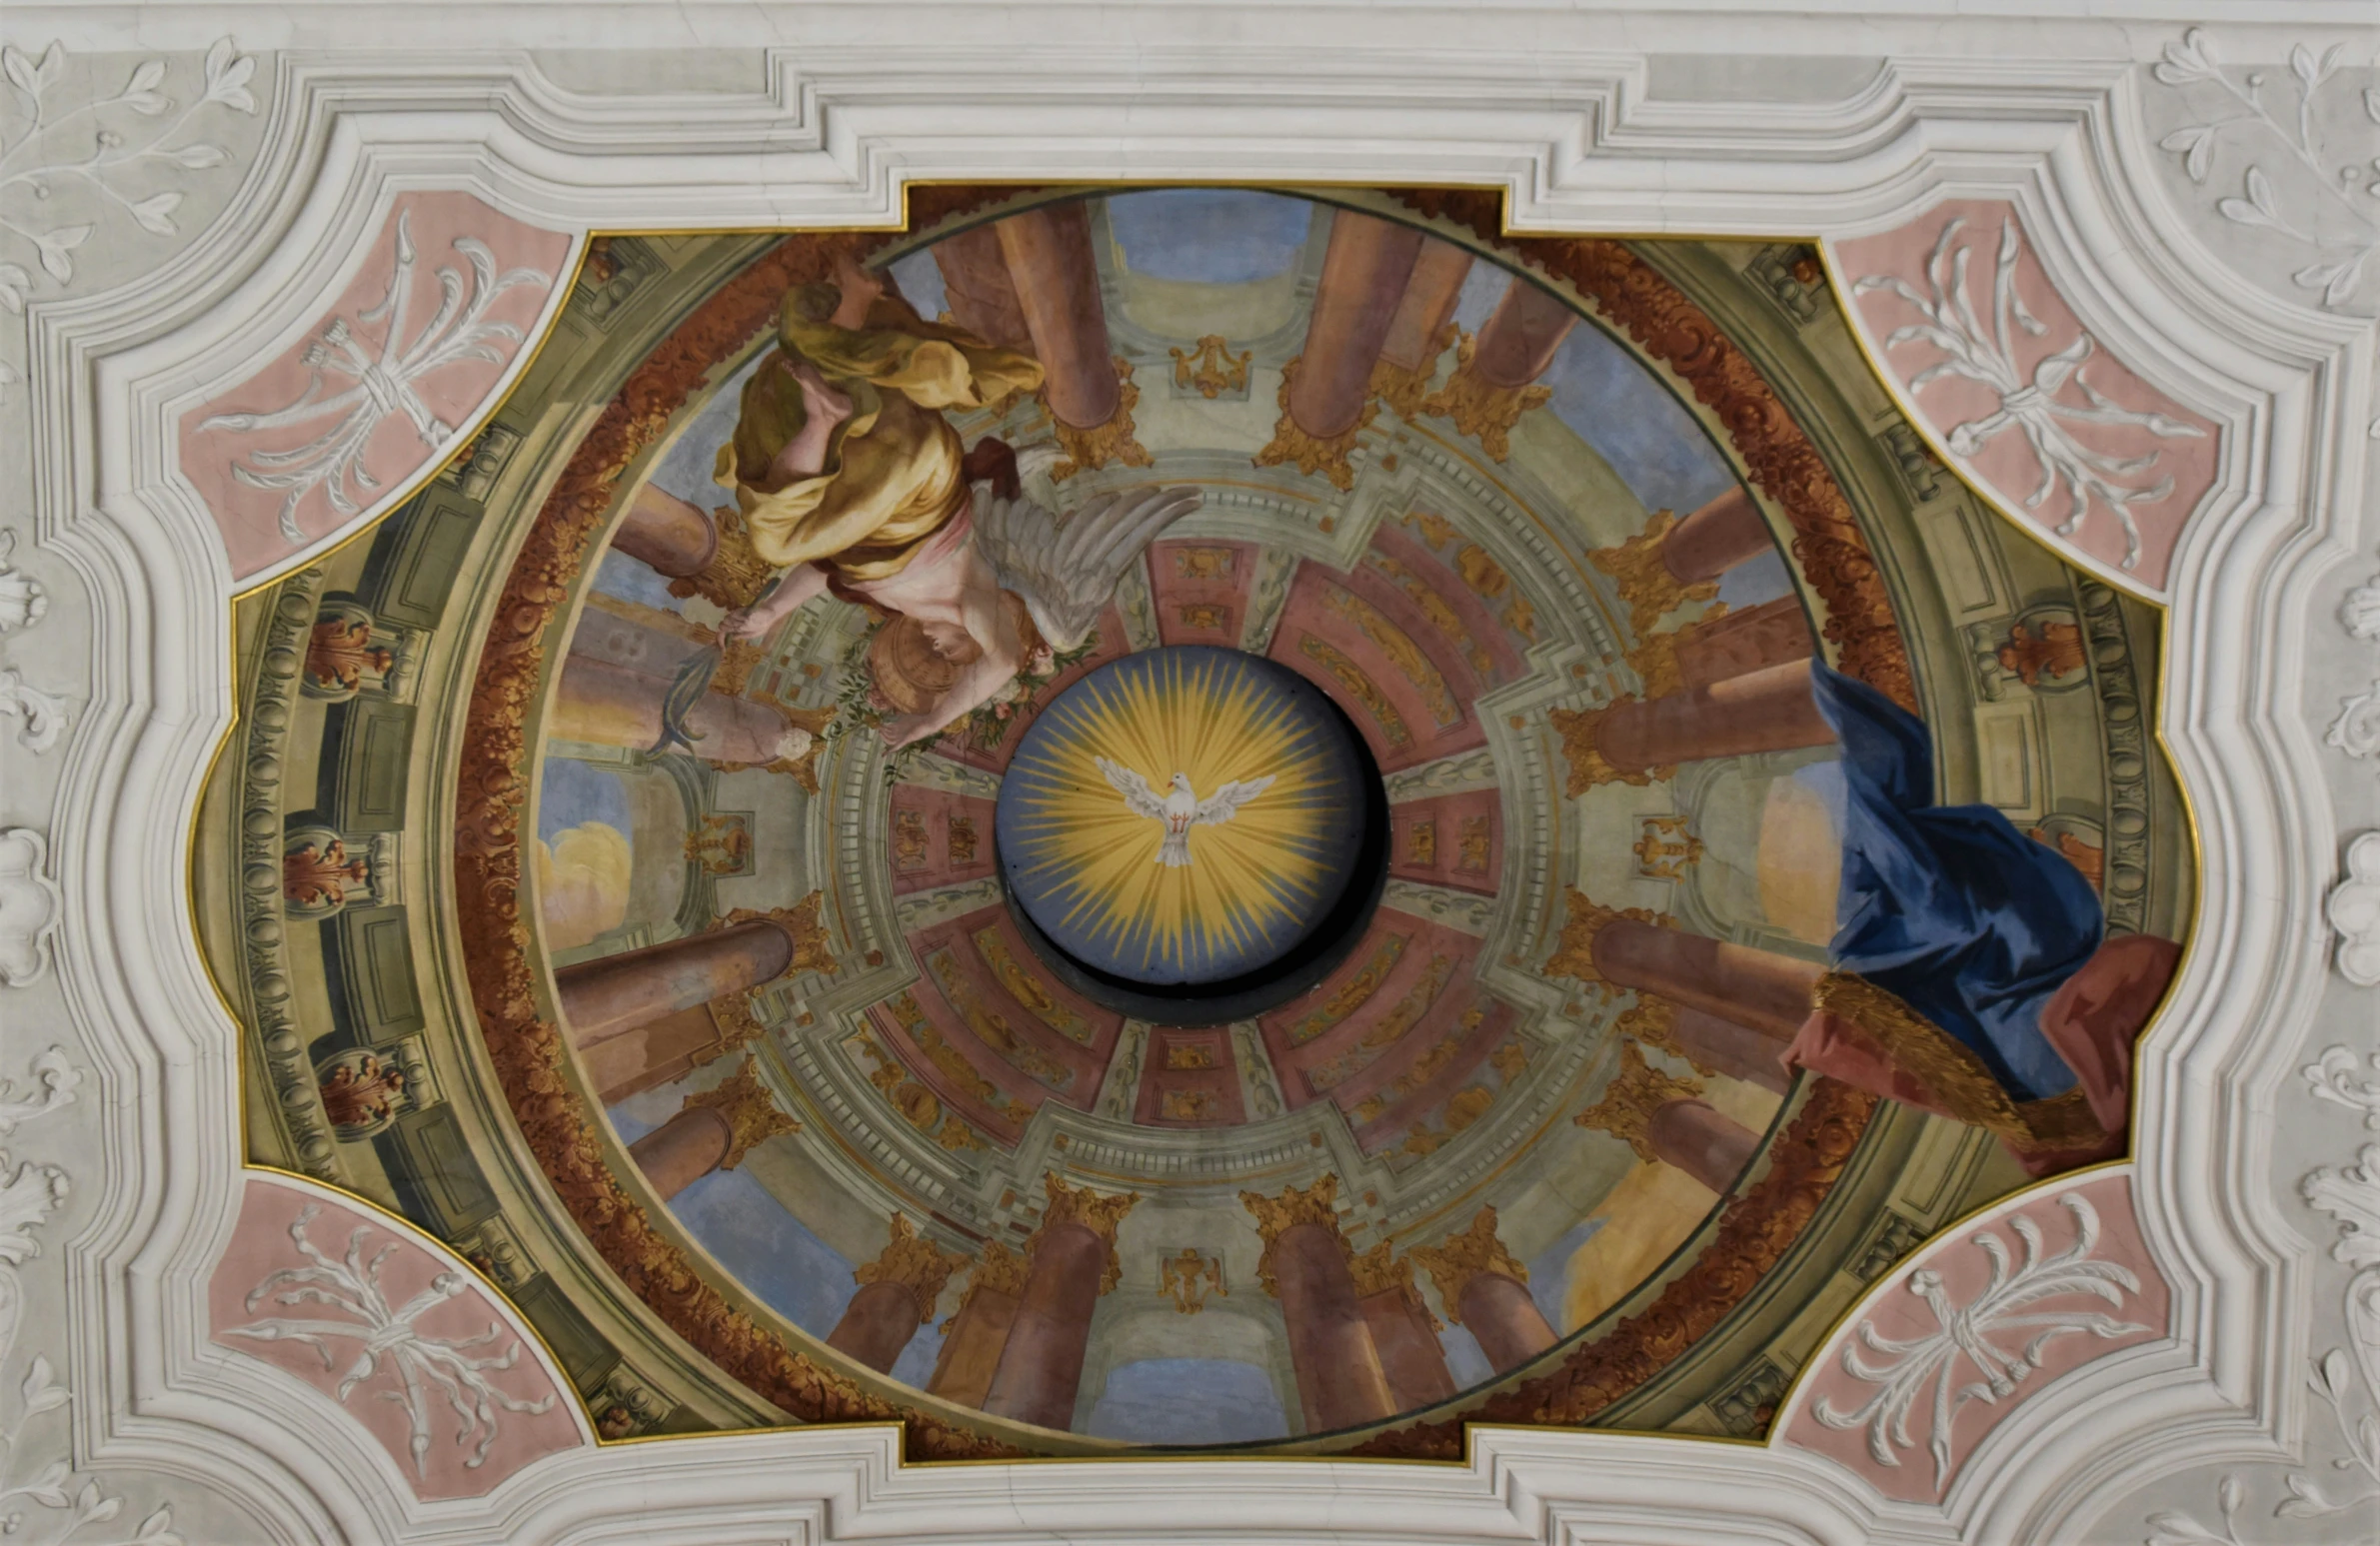 this is a ceiling painted with a religious painting